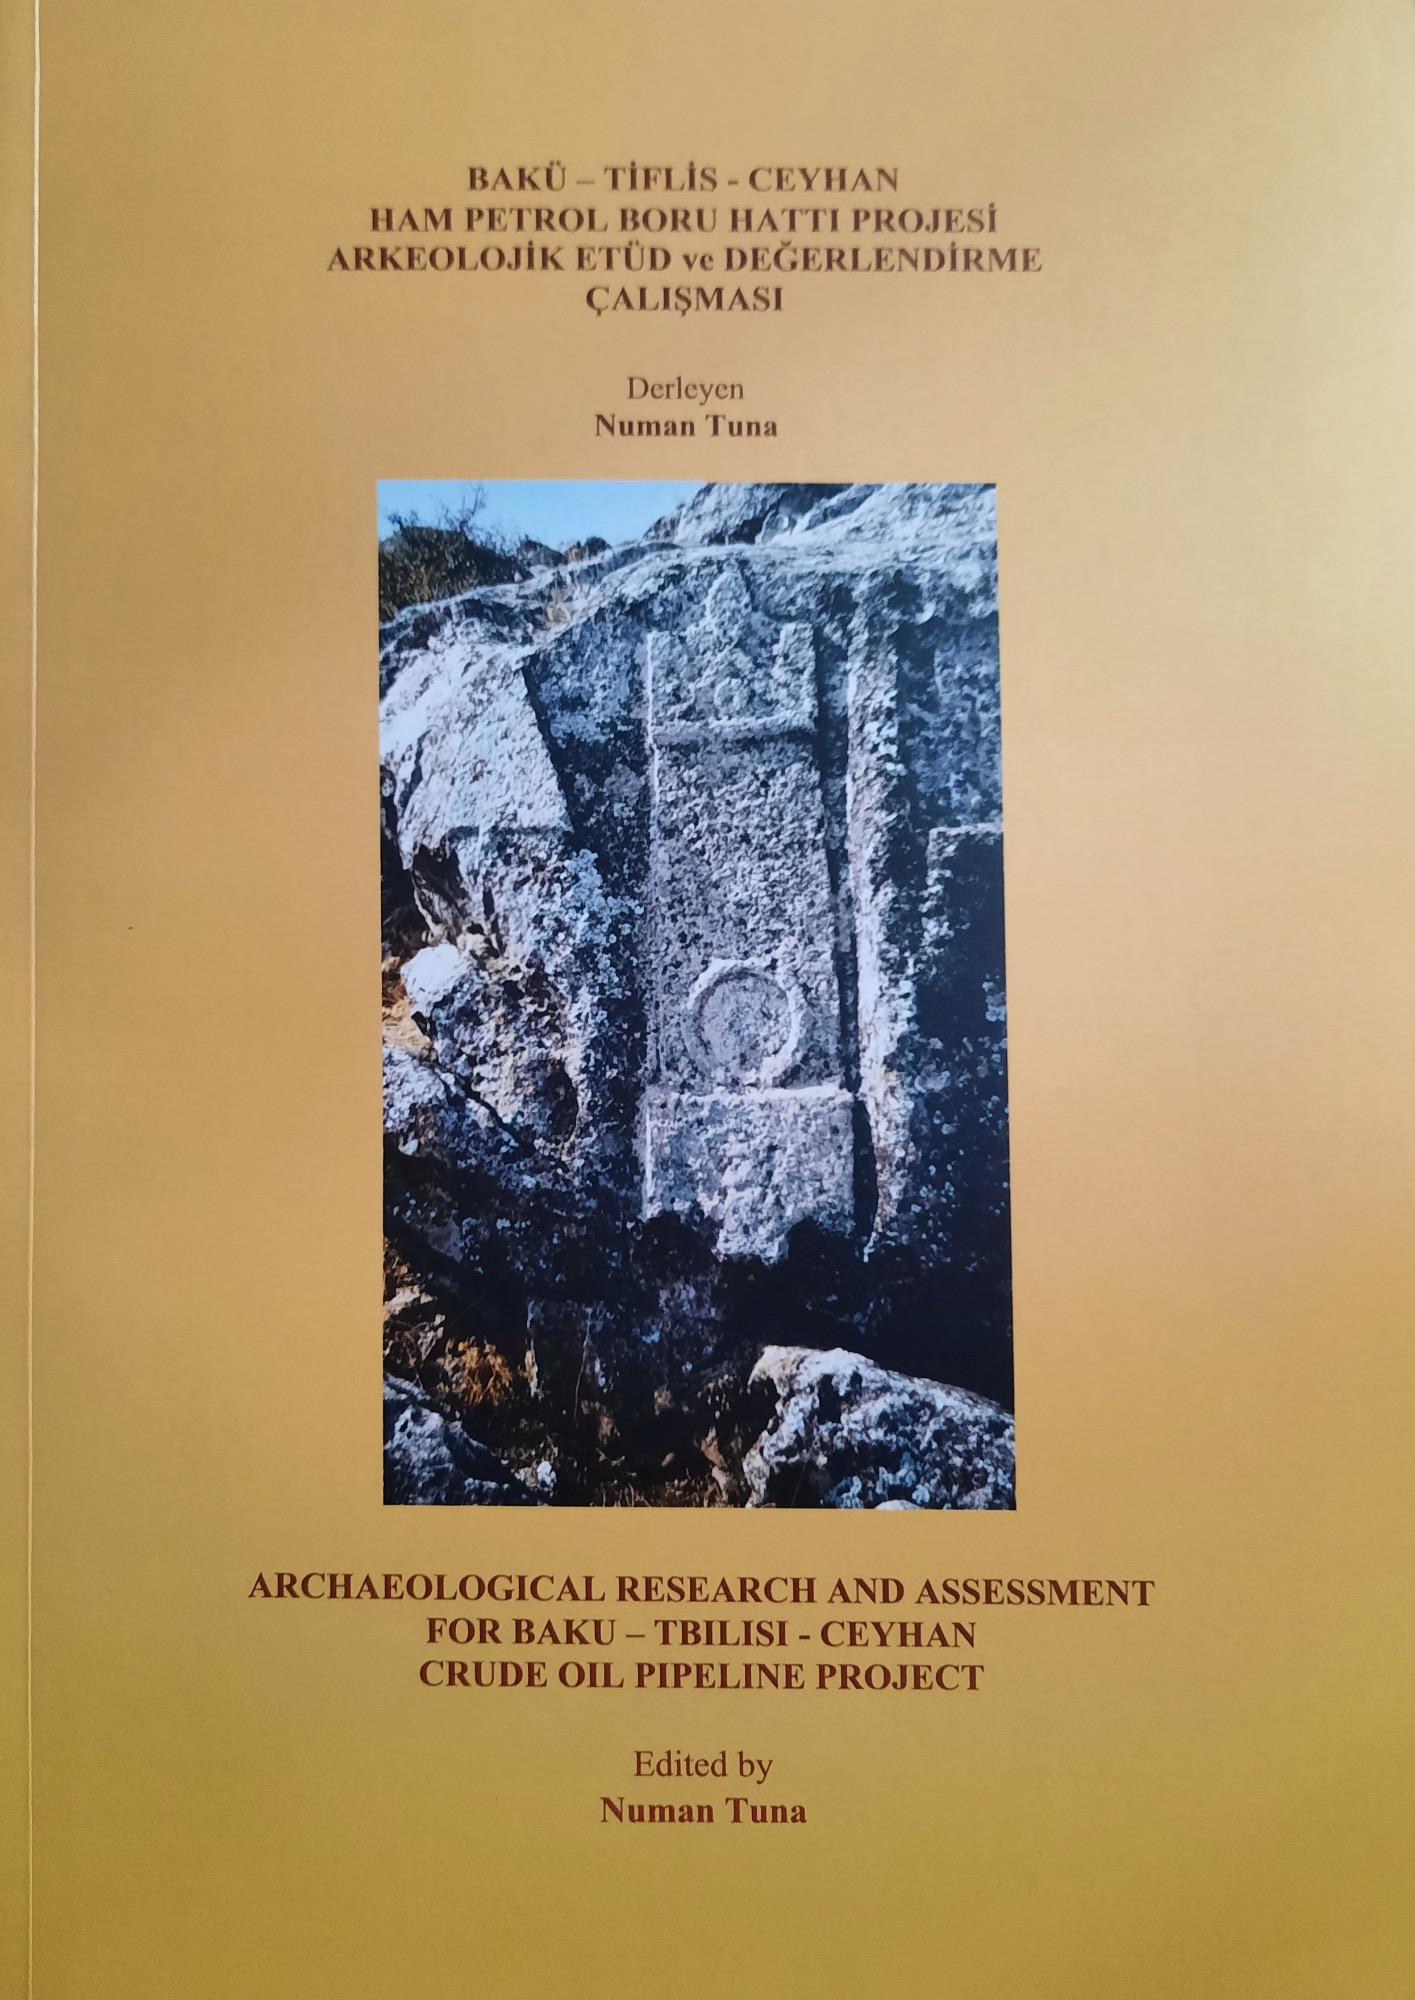 Tuna, Numan : Archaeological Research and Assessment for Baku-Tblisi-Ceyhan Crude Oil Pipeline Project